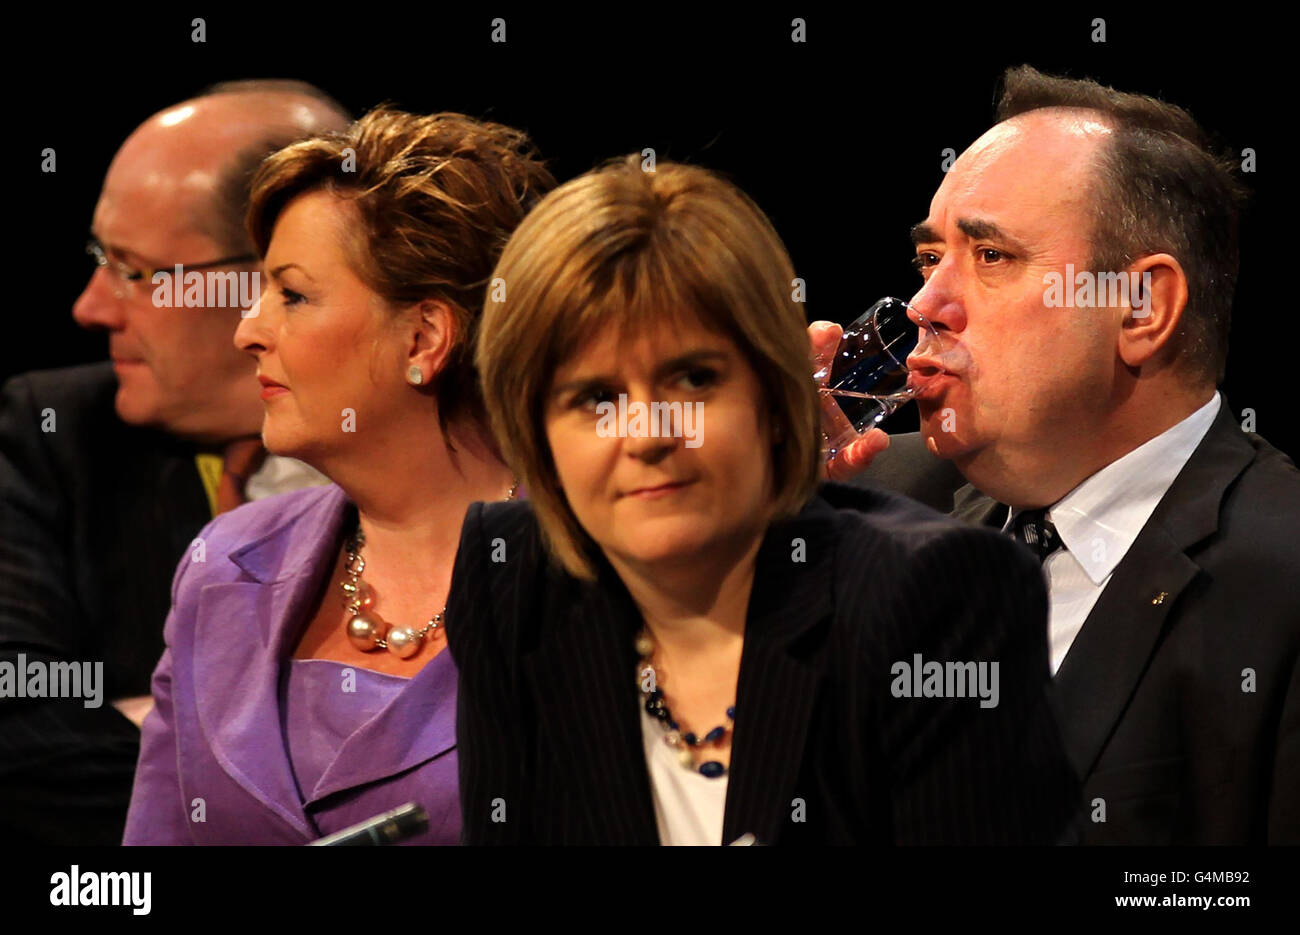 SNP Leader Alex Salmond (right) with Deputy Leader Nicola Sturgeon (2nd right), Finance Secretary John Swinney(left) and Fiona Hyslop Cabinet Secretary for Culture and External Affairs after speaking to delegates at the 77th Scottish National Party annual conference being held at the Eden Court Theatre in Inverness. Stock Photo